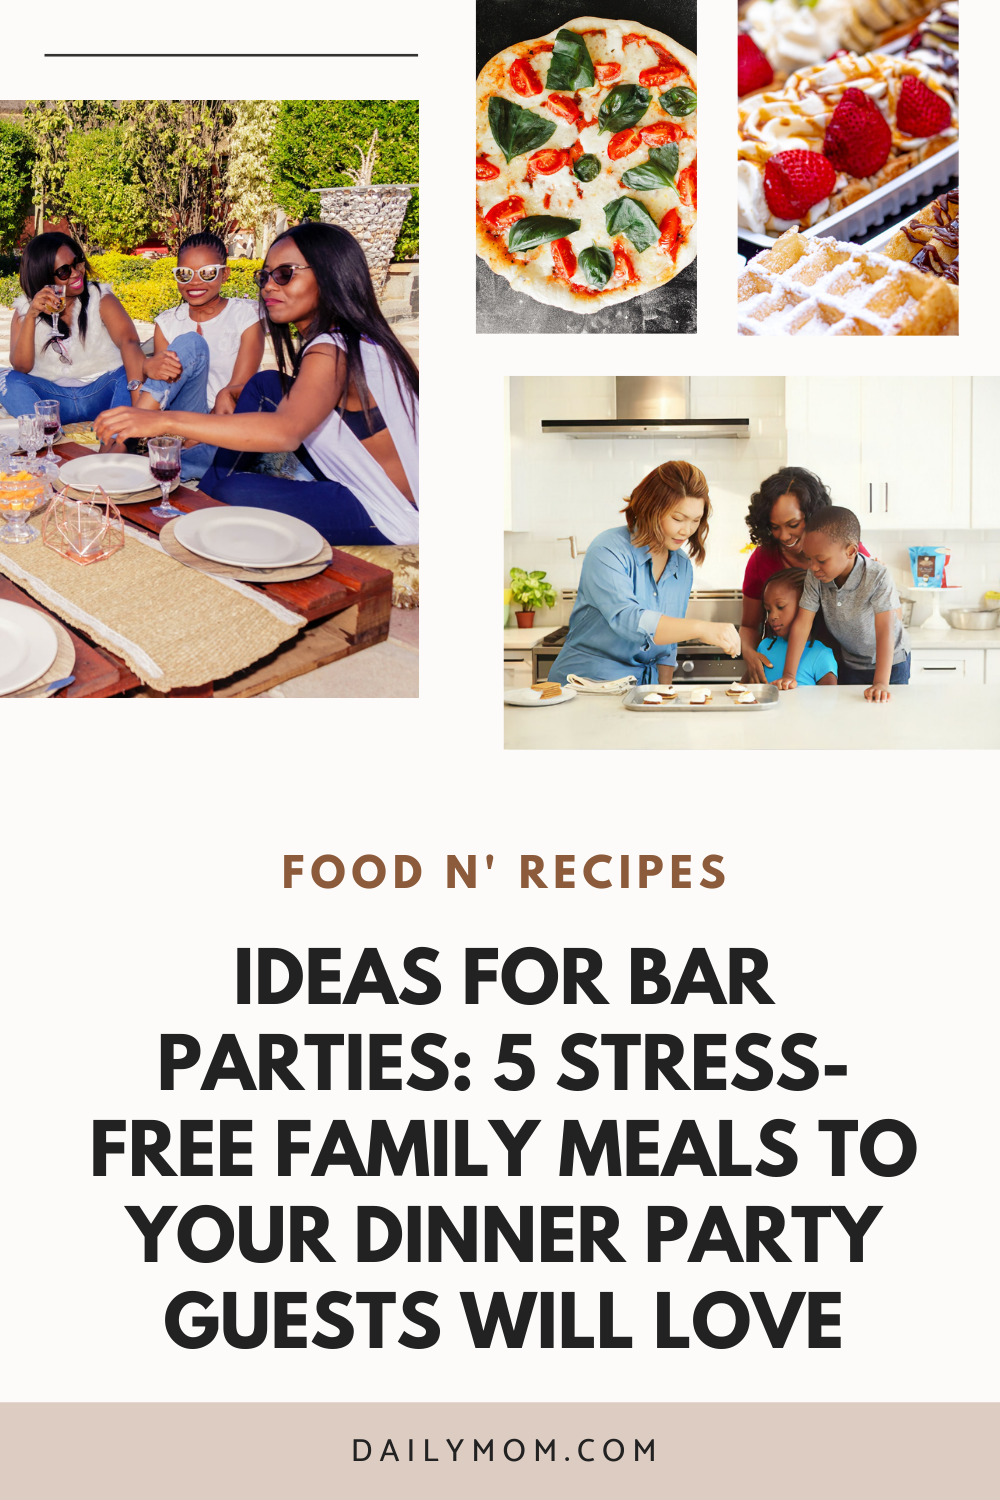 Ideas For Bar Parties: 5 Simple & Stress-free Meals Your Dinner Party Guests Will Love